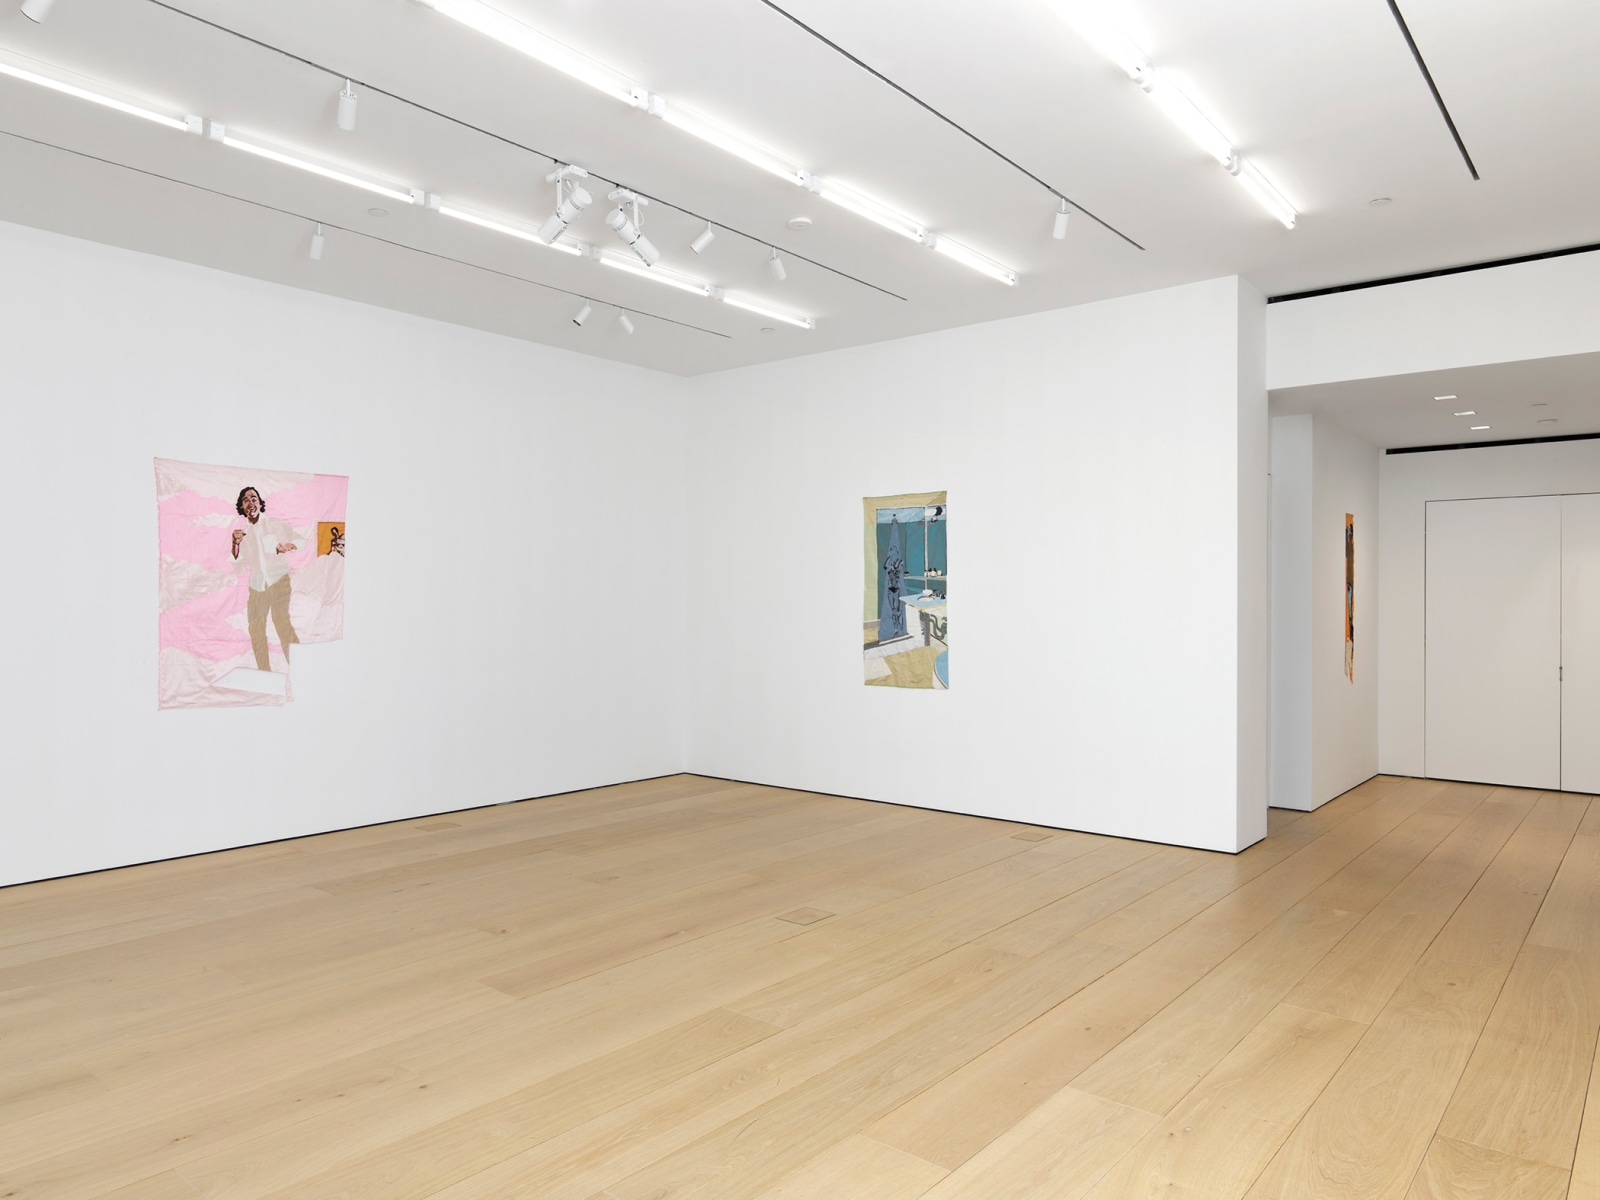 Fifth installation view of the exhibition Billie Zangewa: Wings of Change at Lehmann Maupin in New York